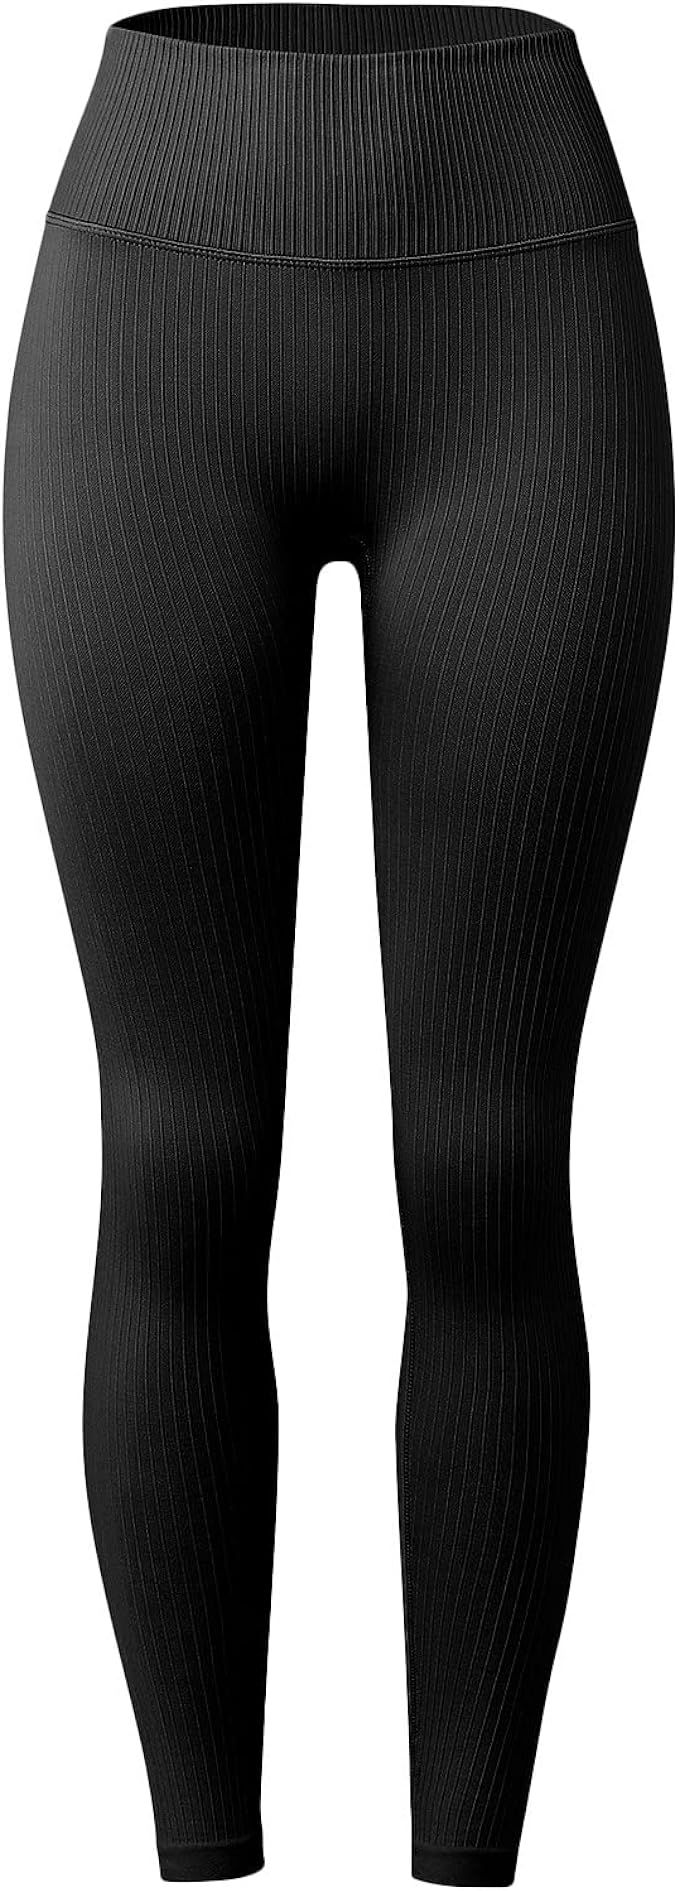 NEW LADIES RIBBED SEAMLESS LEGGINGS HIGH WAIST TUMMY CONTROL SOLID